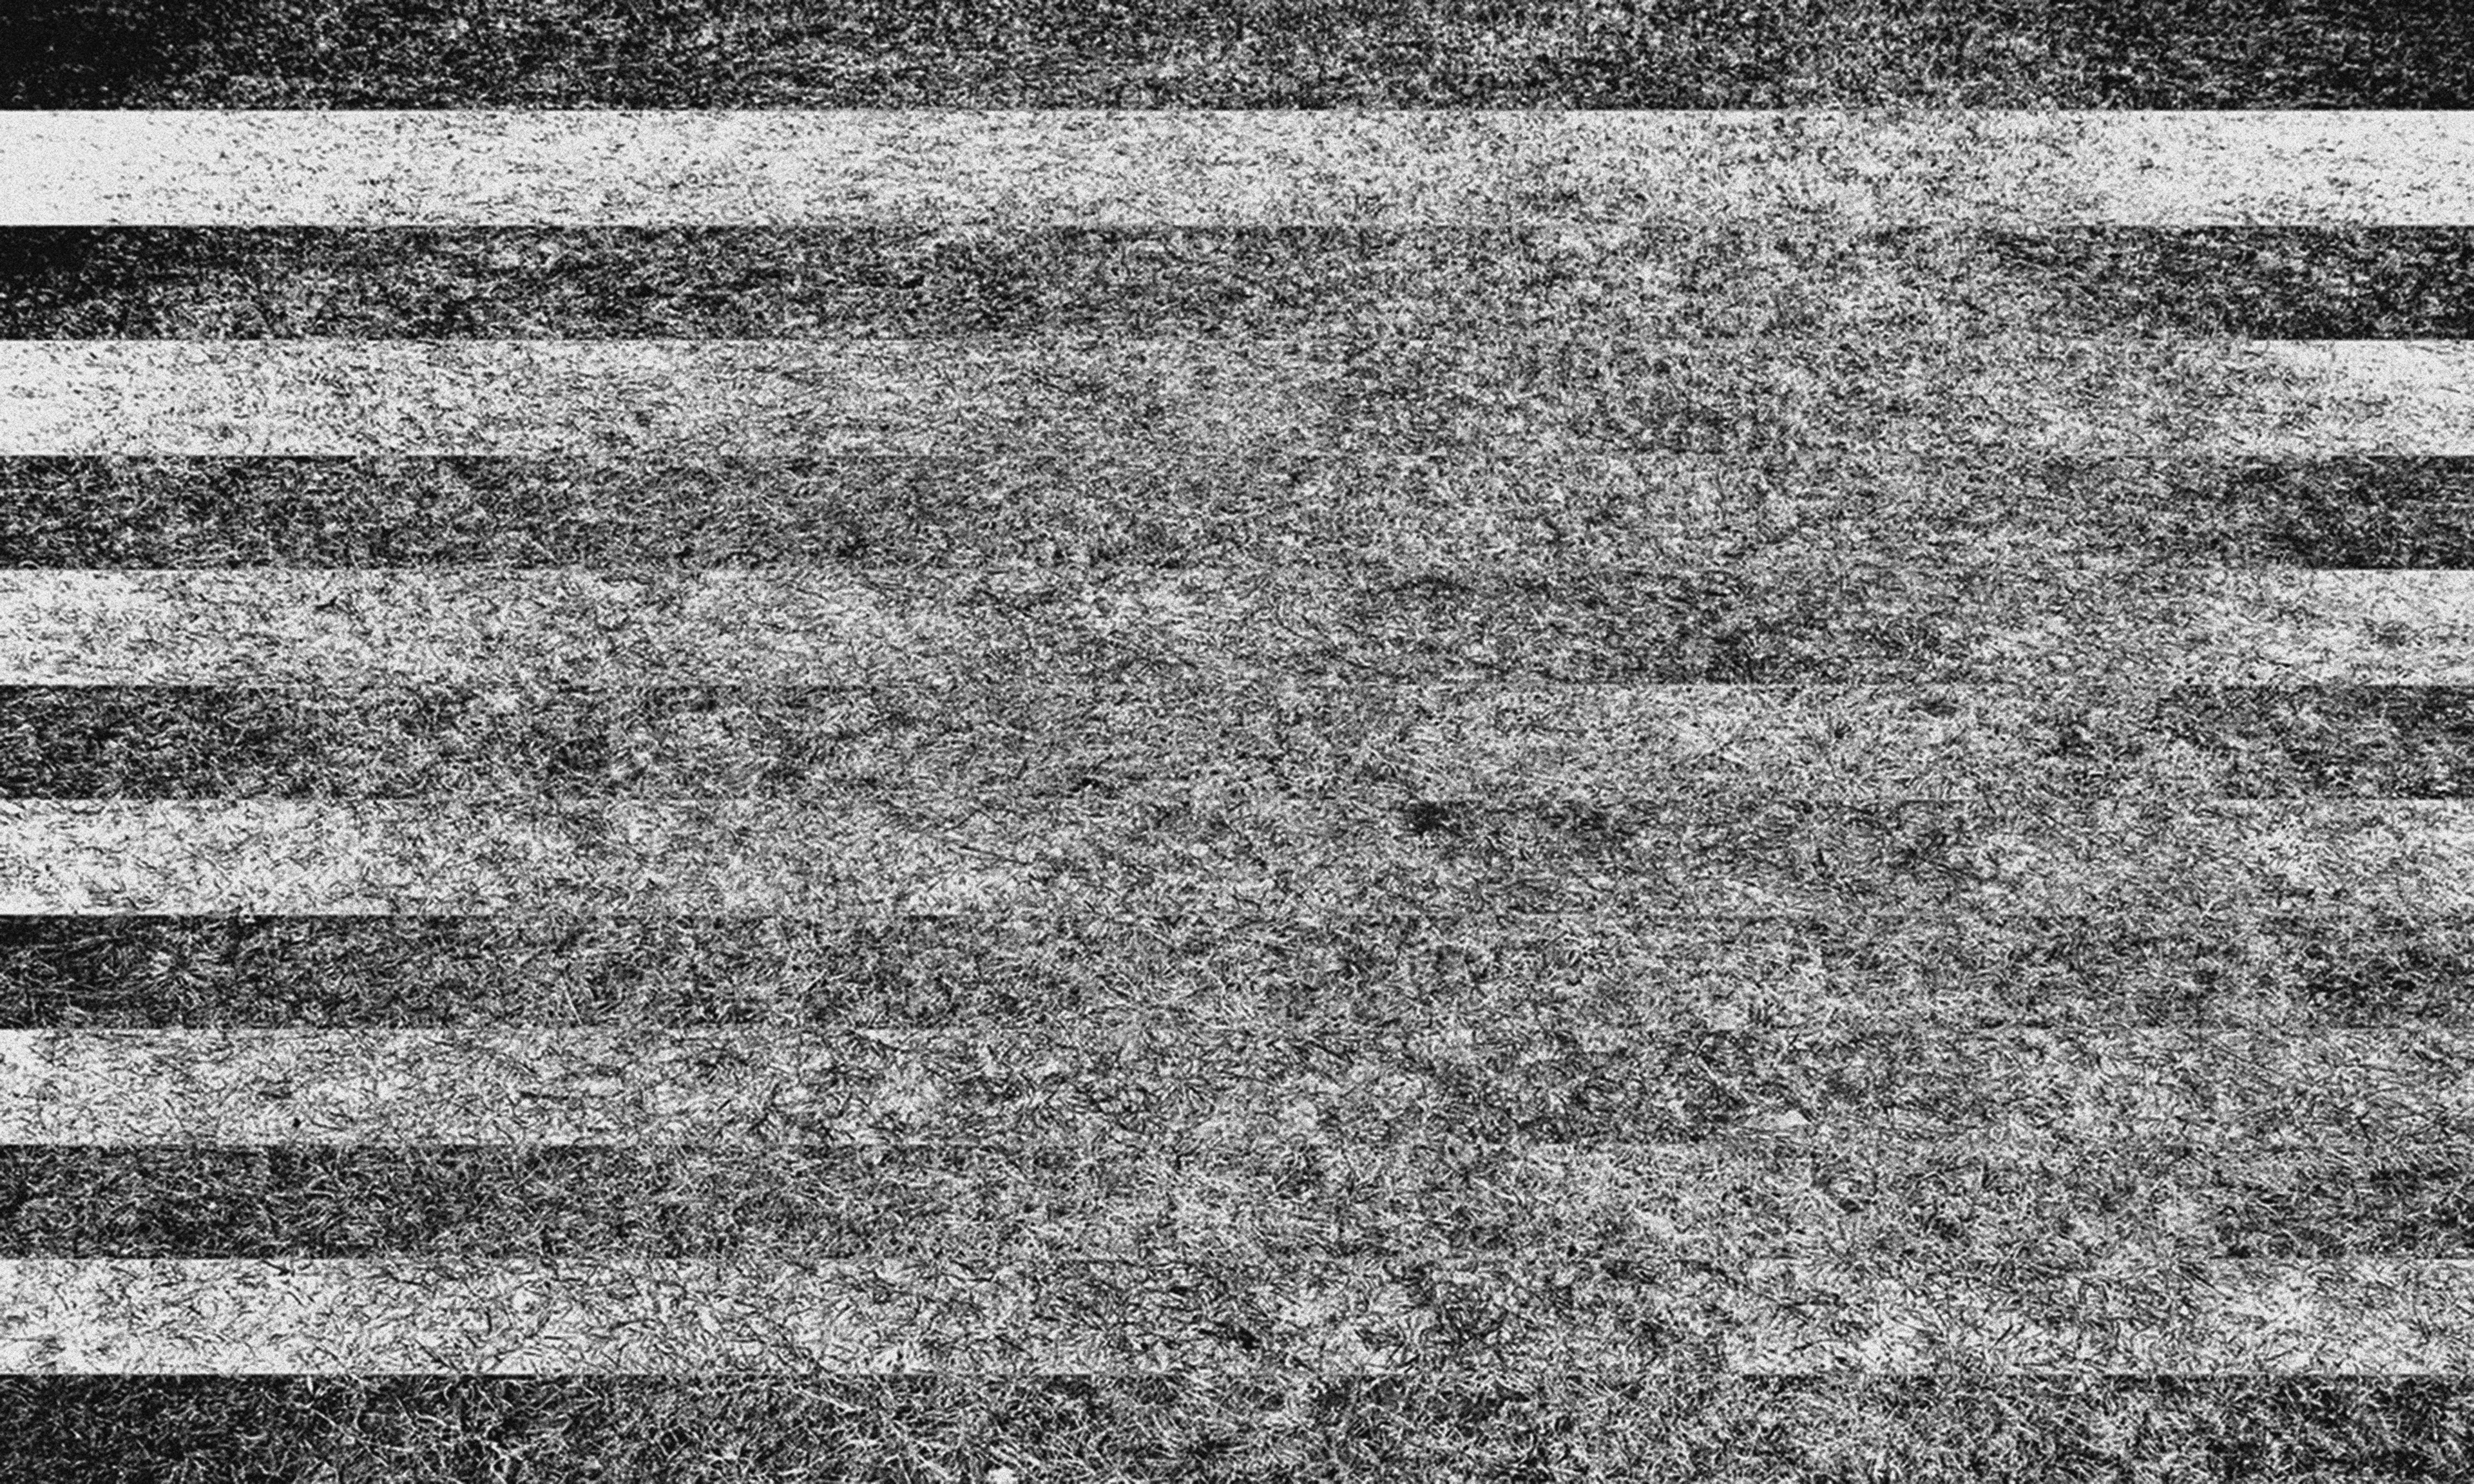 Black and white graphic with stripes and a blob of noise